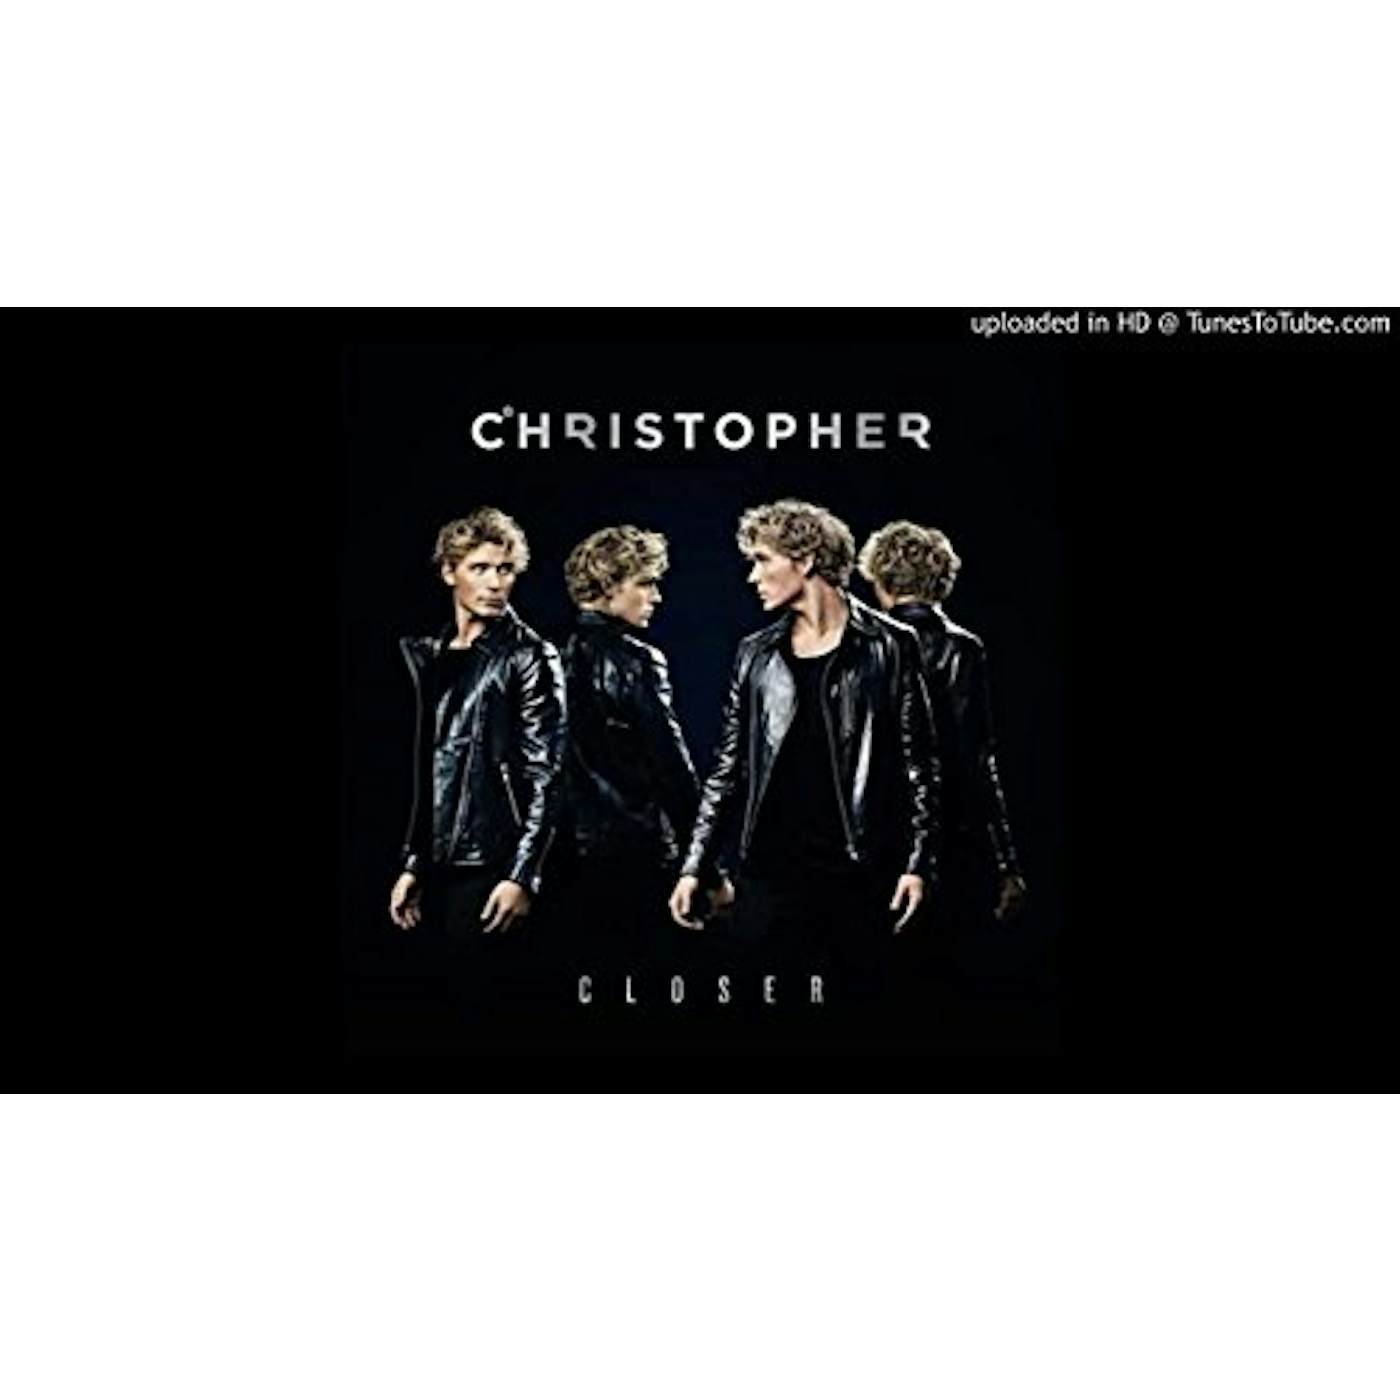 Christopher CLOSER & MORE HITS: DELUXE EDITION CD